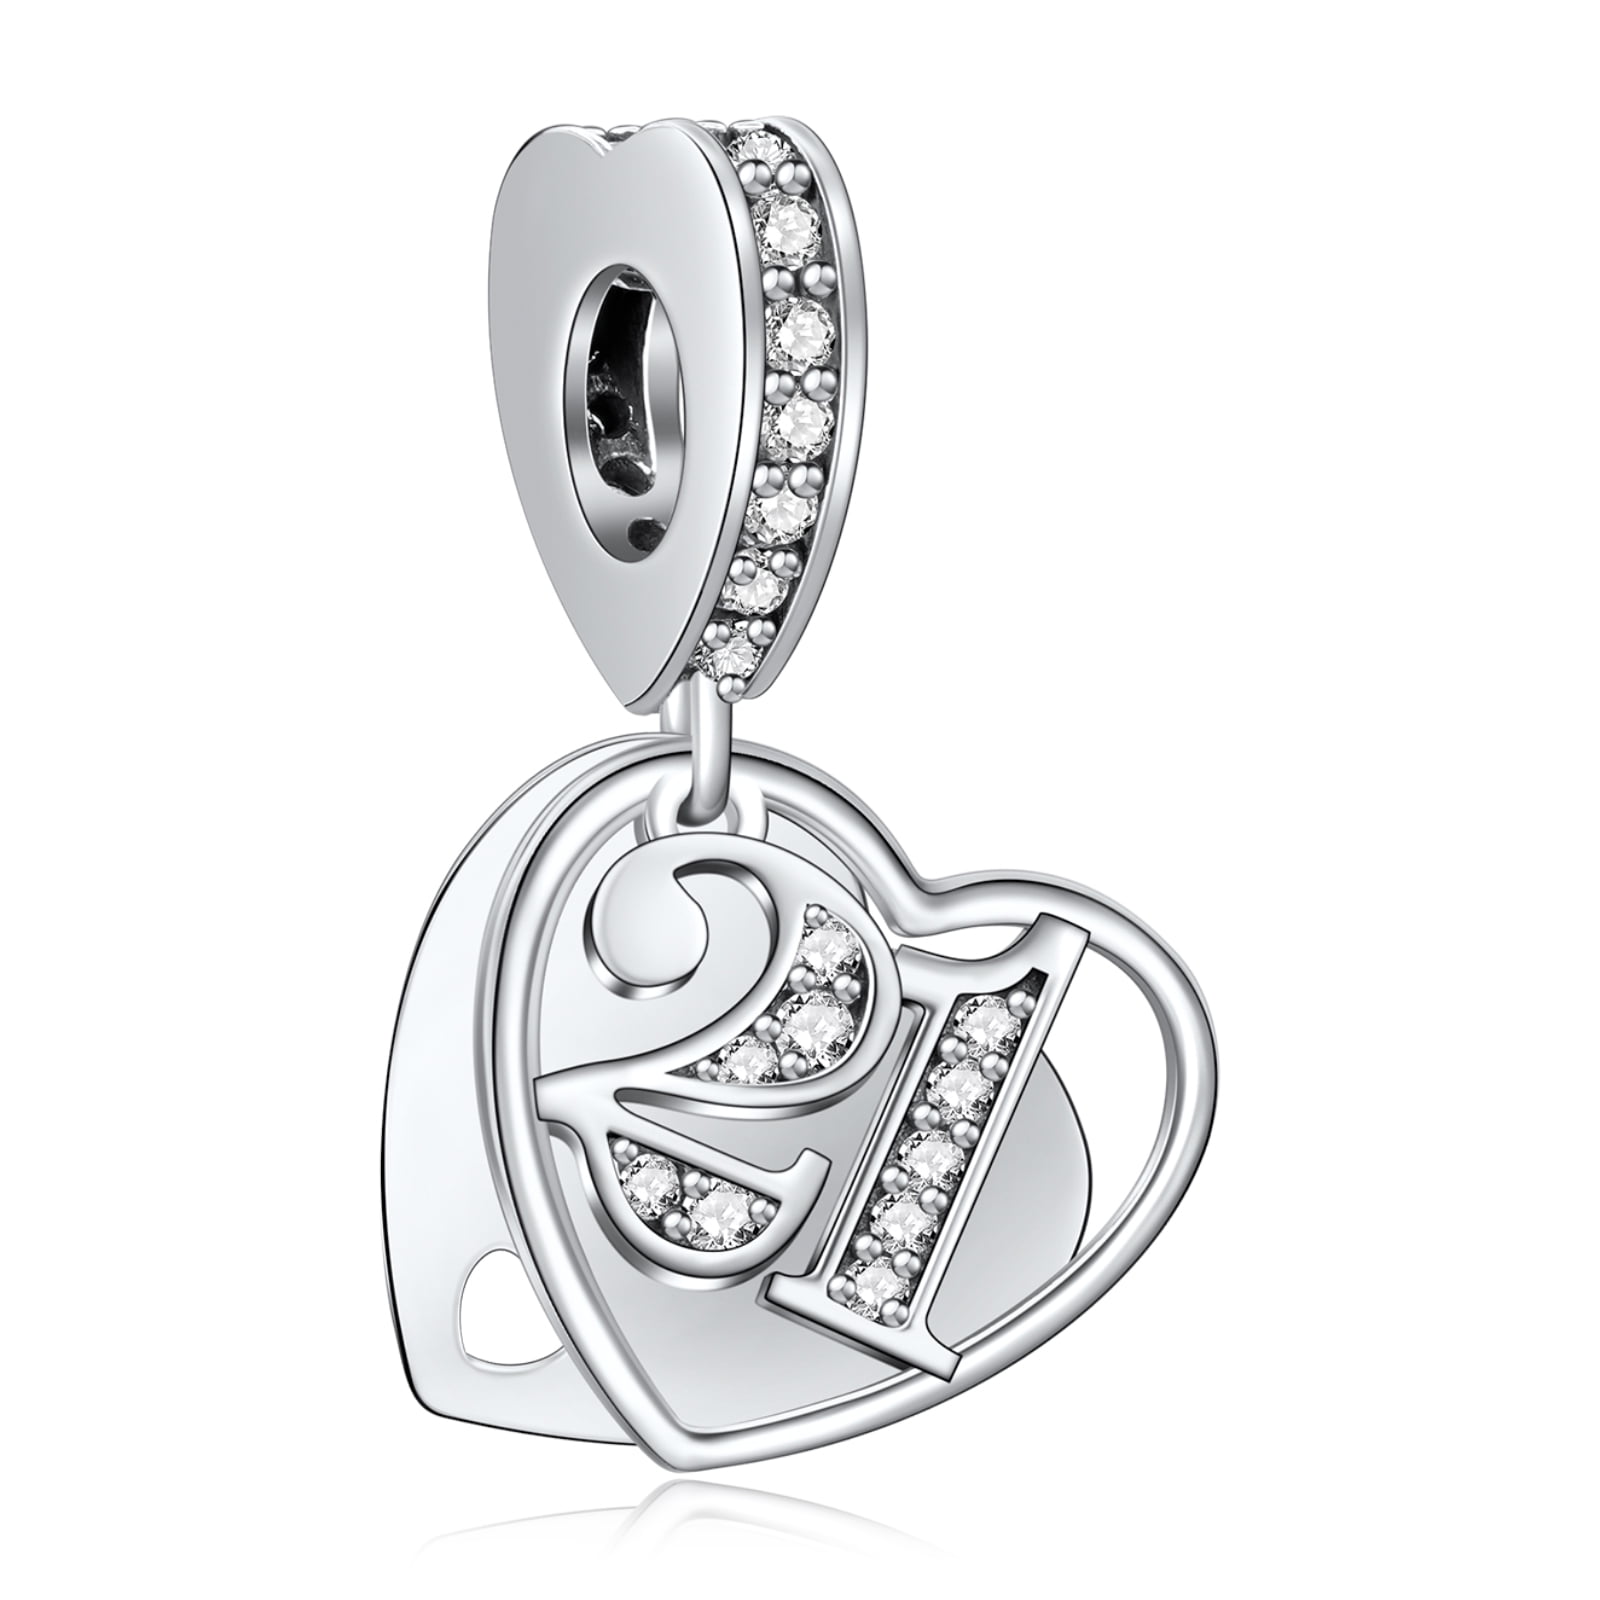 Valentine's Day Gift Charms 925 Sterling Silver Love Heart Cupid Baby Charms  Fit Pandora Original Bracelet